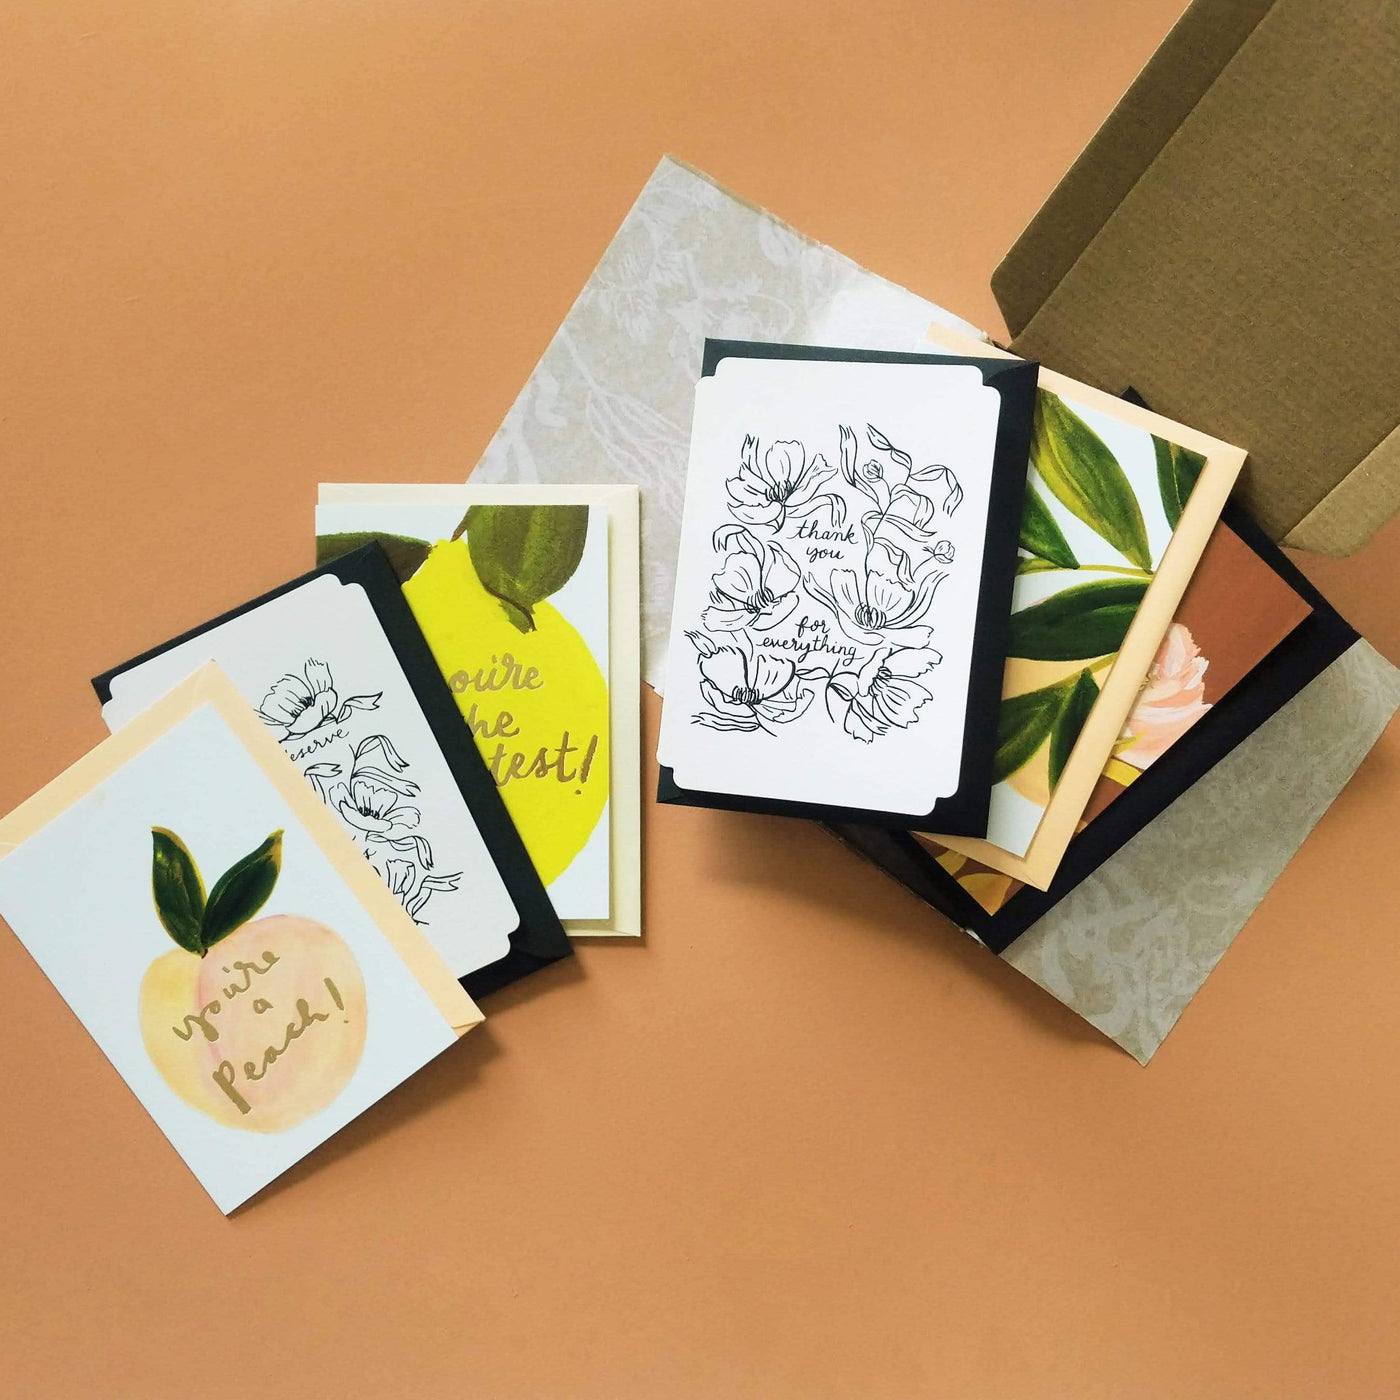 6 Pack of illustrated thank you cards wrapped in tissue